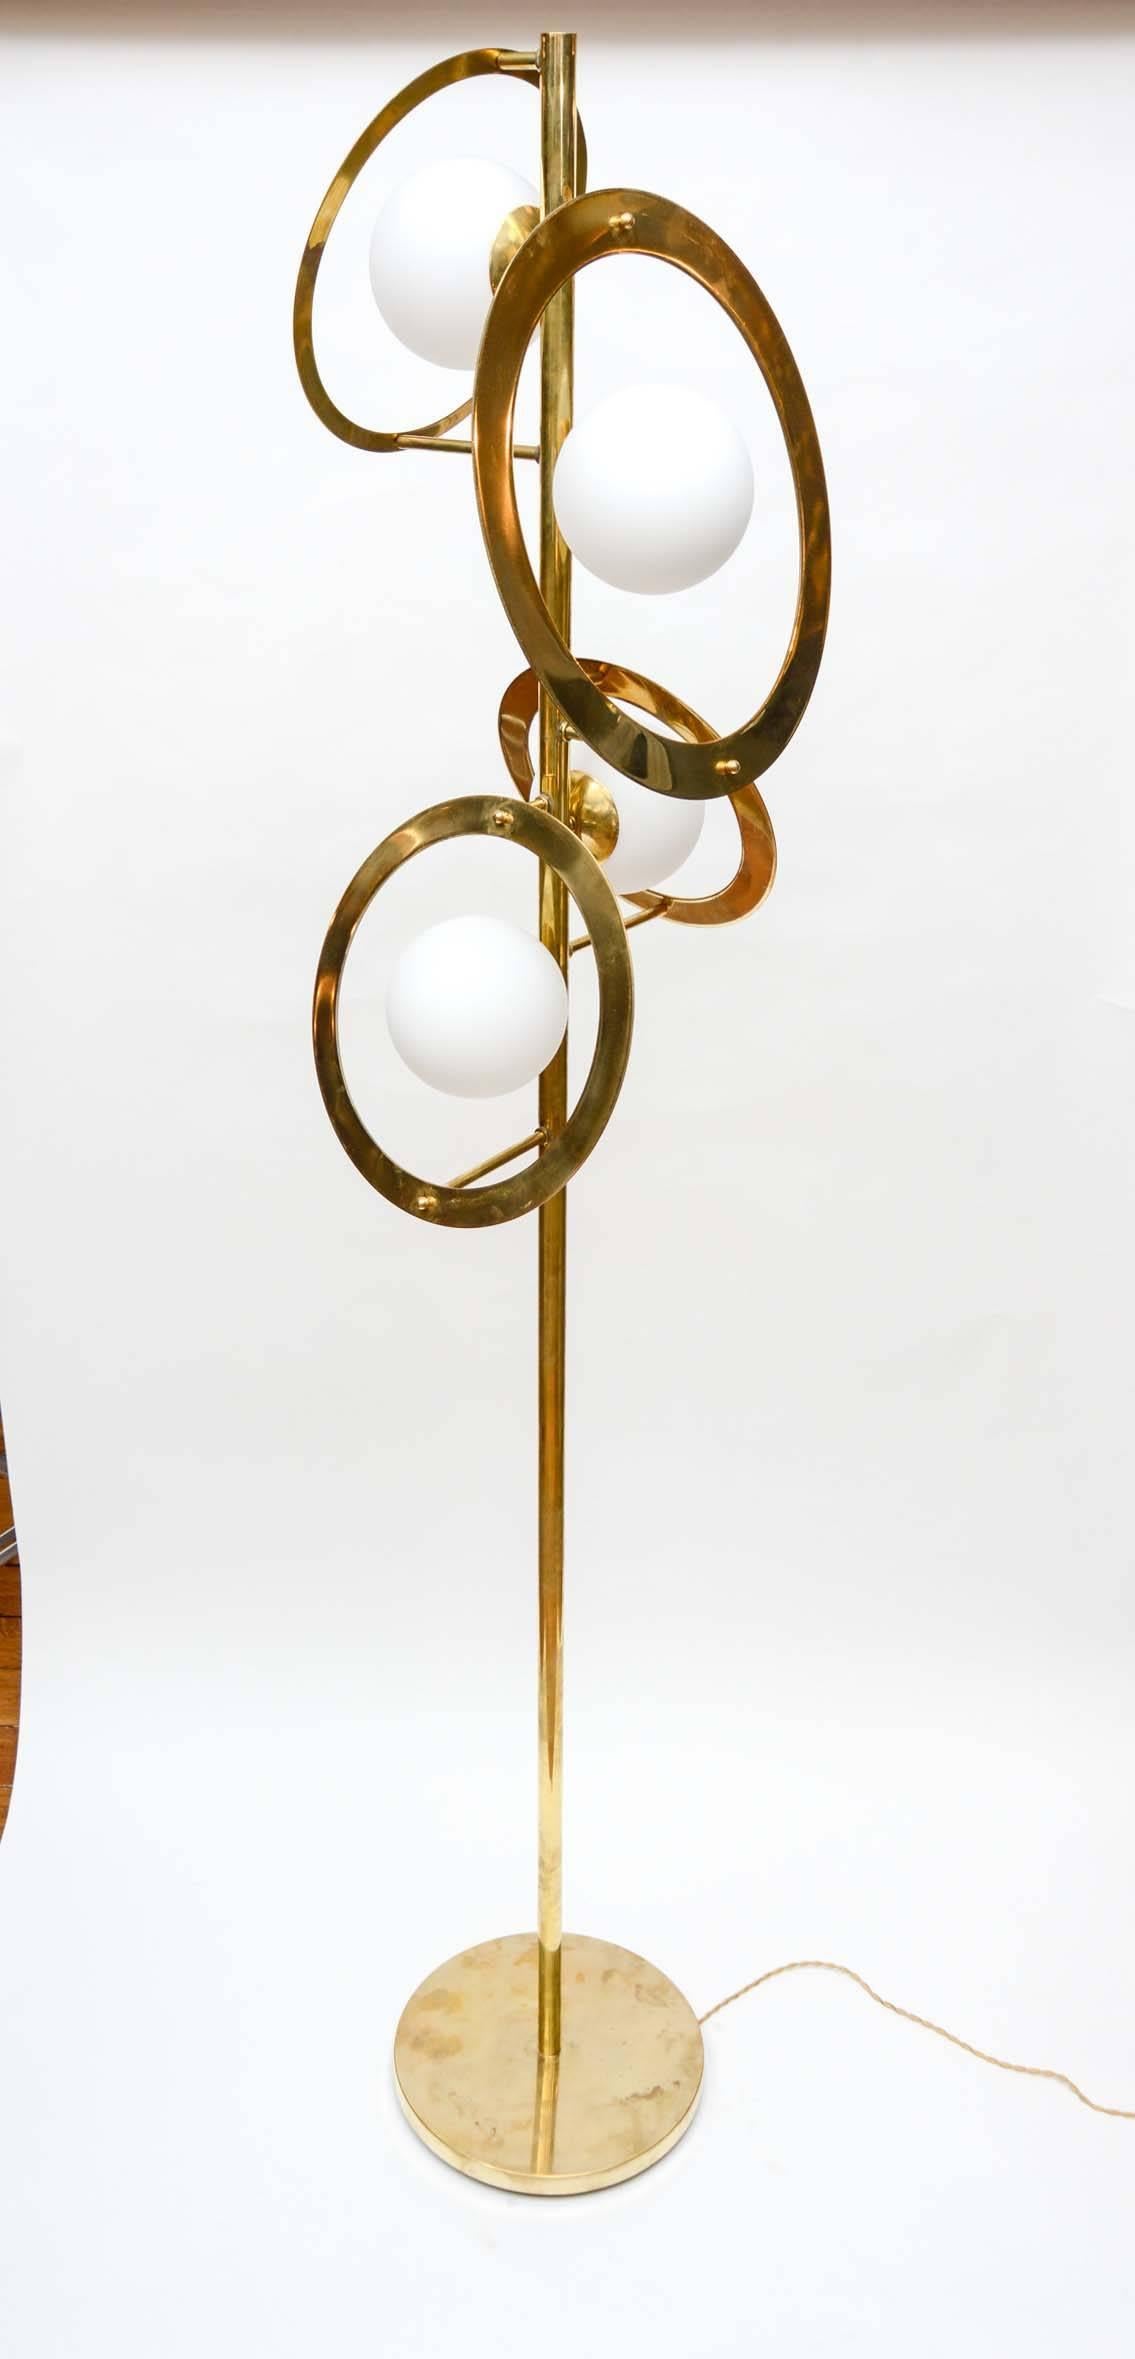 Pair of Saturn design floor lamps by Glustin Luminaires.

Brass feet, central stem and decorative rings, four sources of lights in the Murano glass globes.